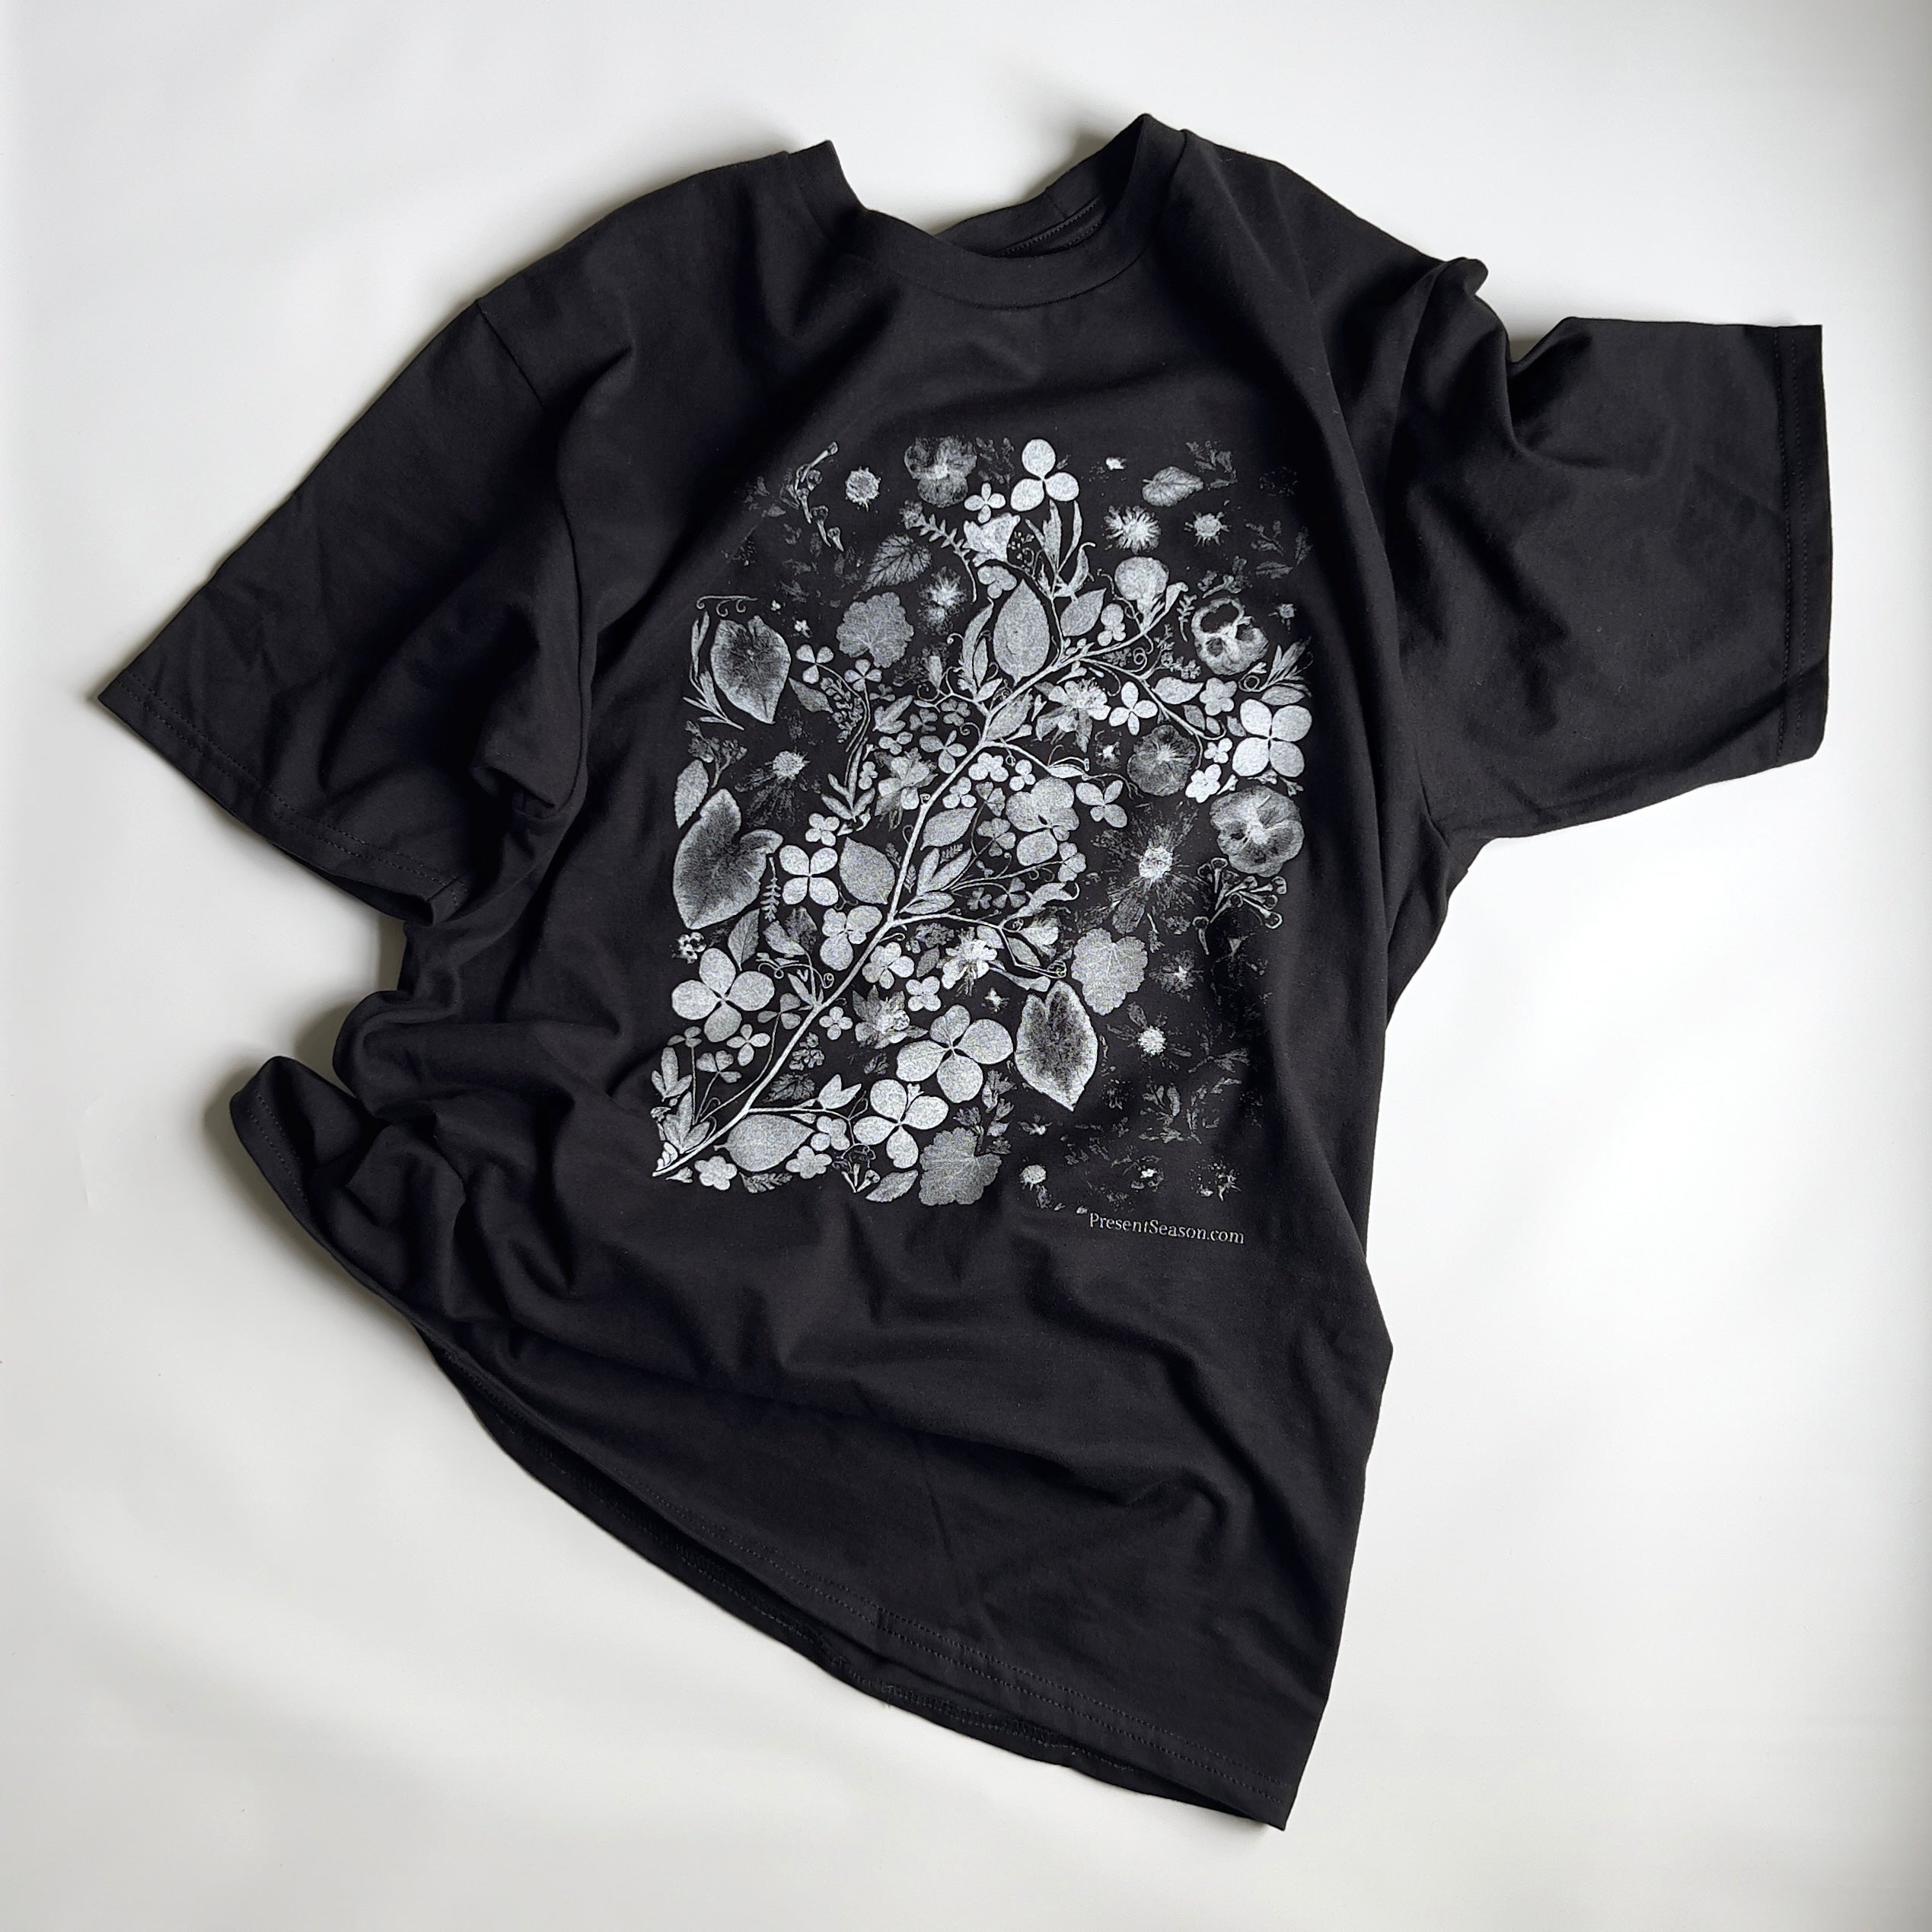 A black short sleeved t-shirt with a white and gray rectangular print of an art scene made from pressed flowers.